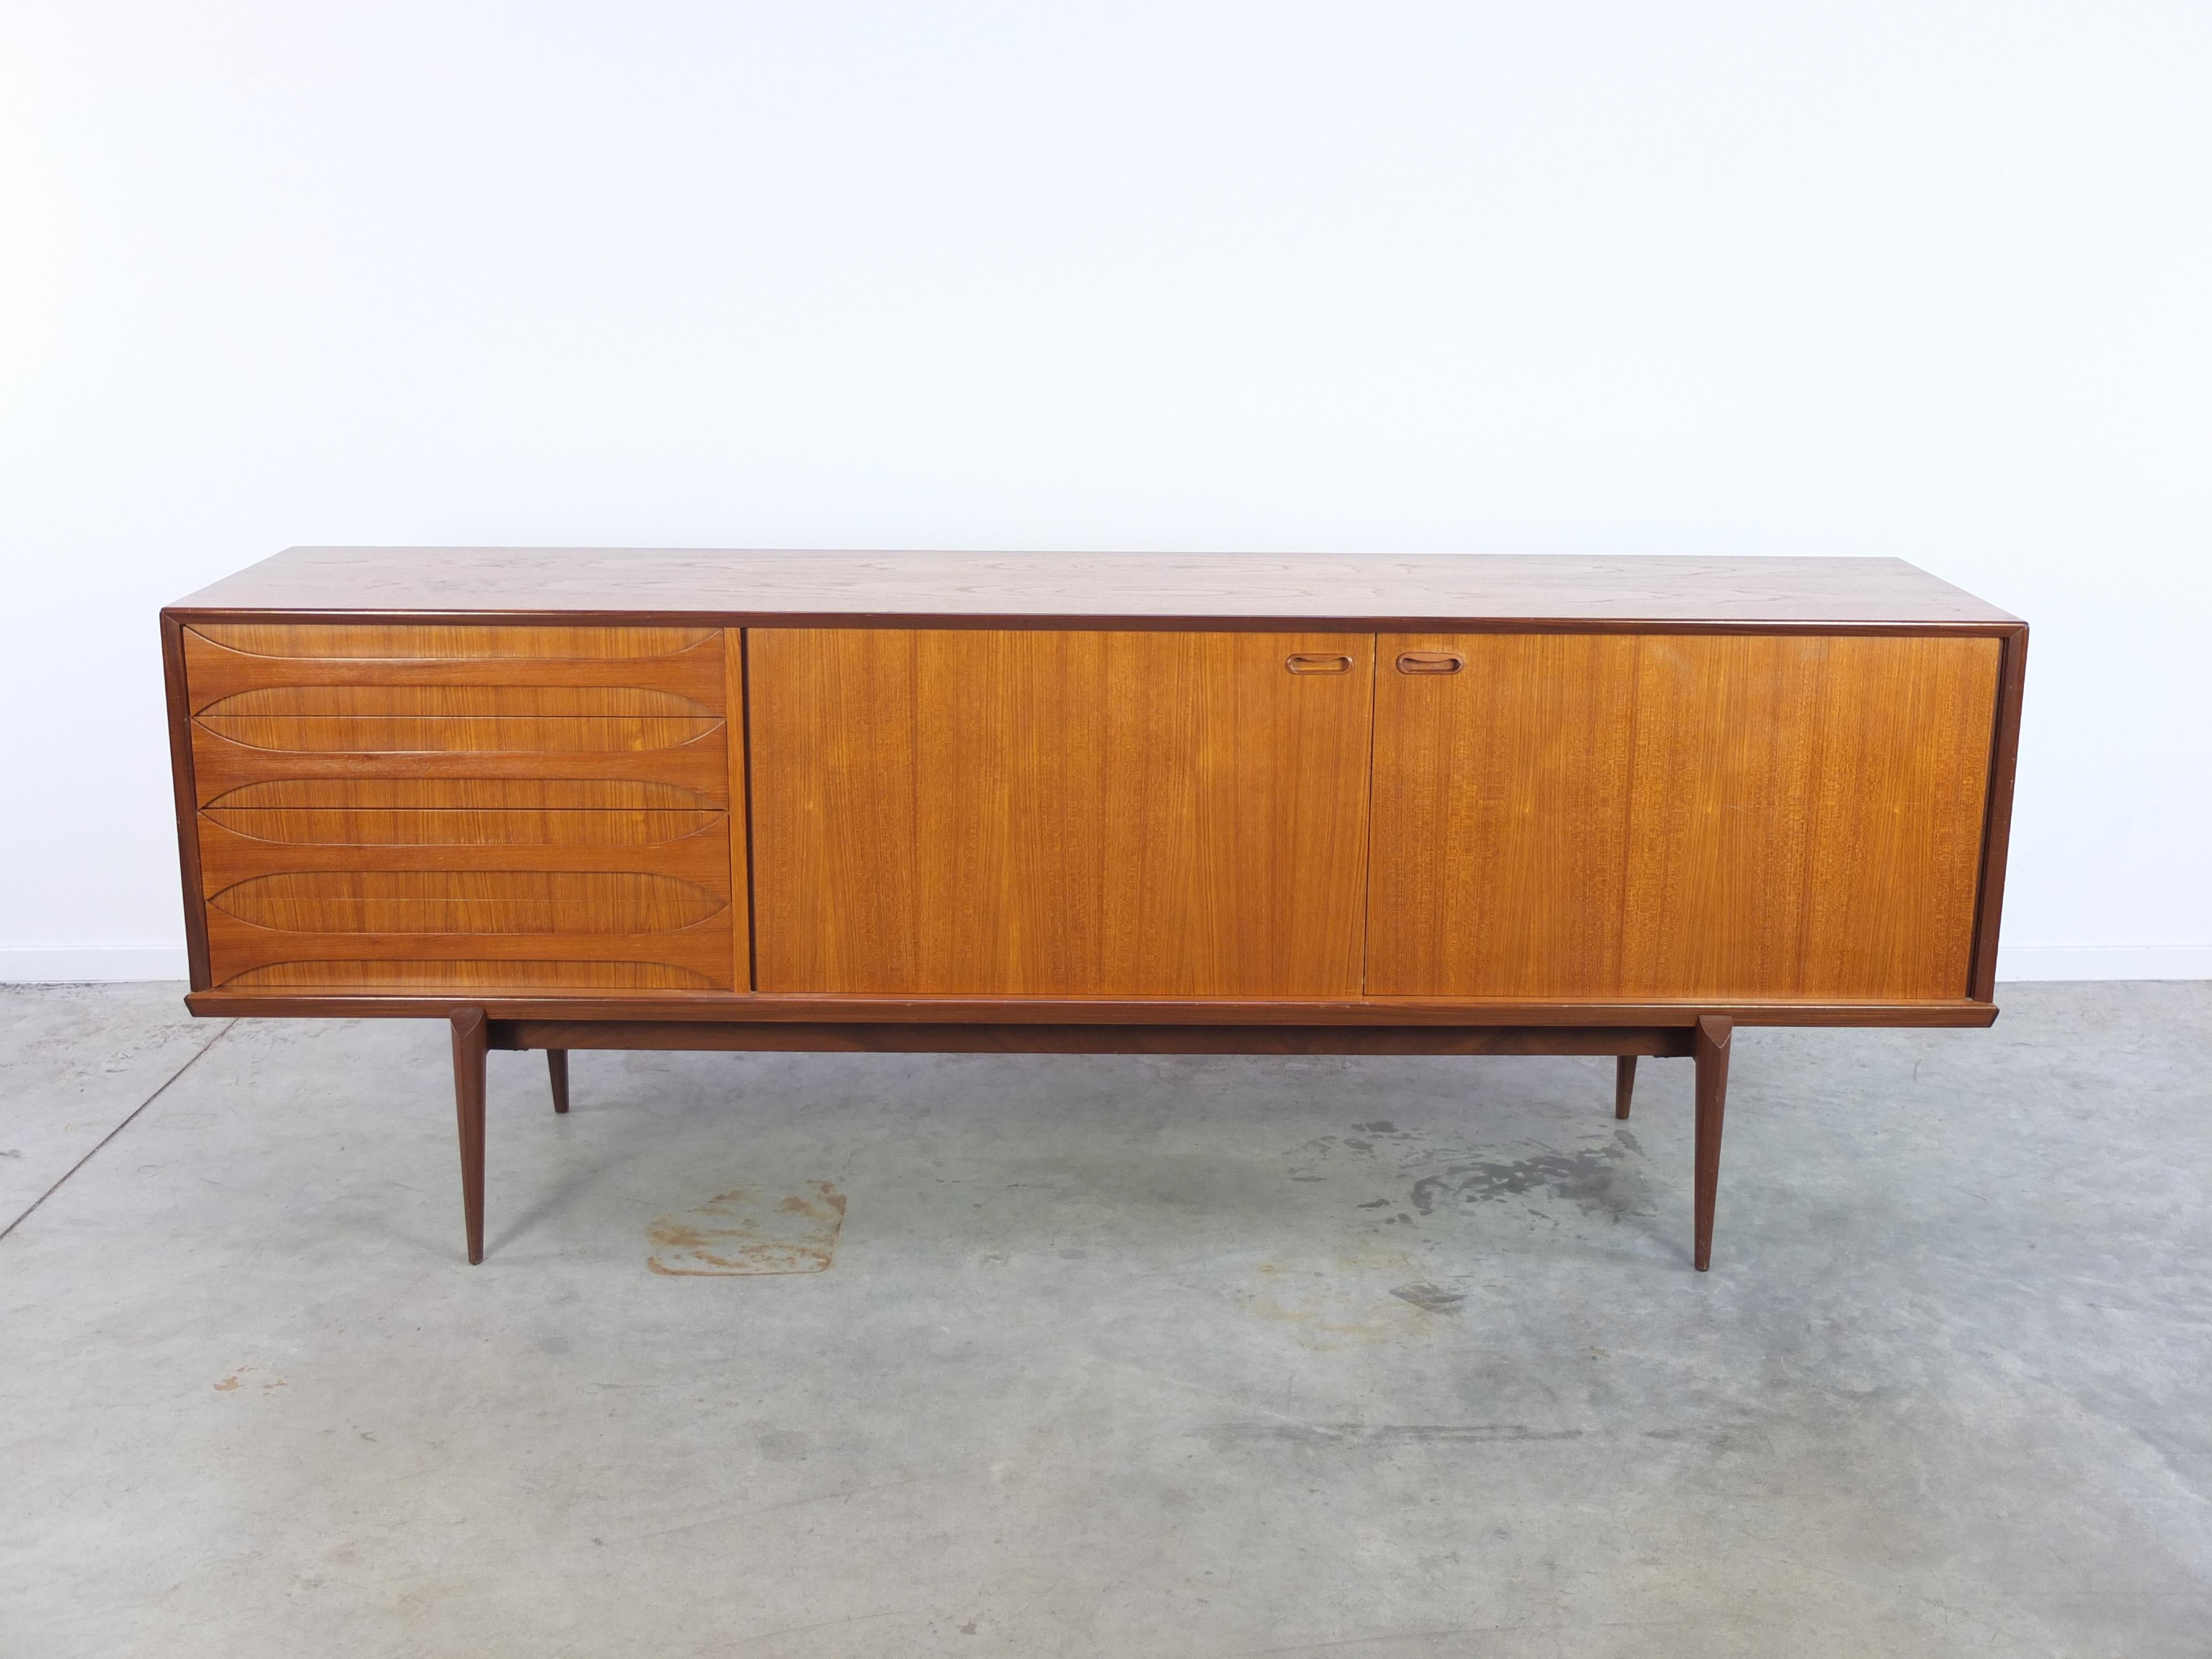 Beautiful teak sideboard designed by Oswald Vermaercke for V-Form in Belgium during the 1960s. This so called ‘Astrid’ sideboard is named after the Belgian princess in 1962 and it is way less common than the ‘Paola’ model. There are great details